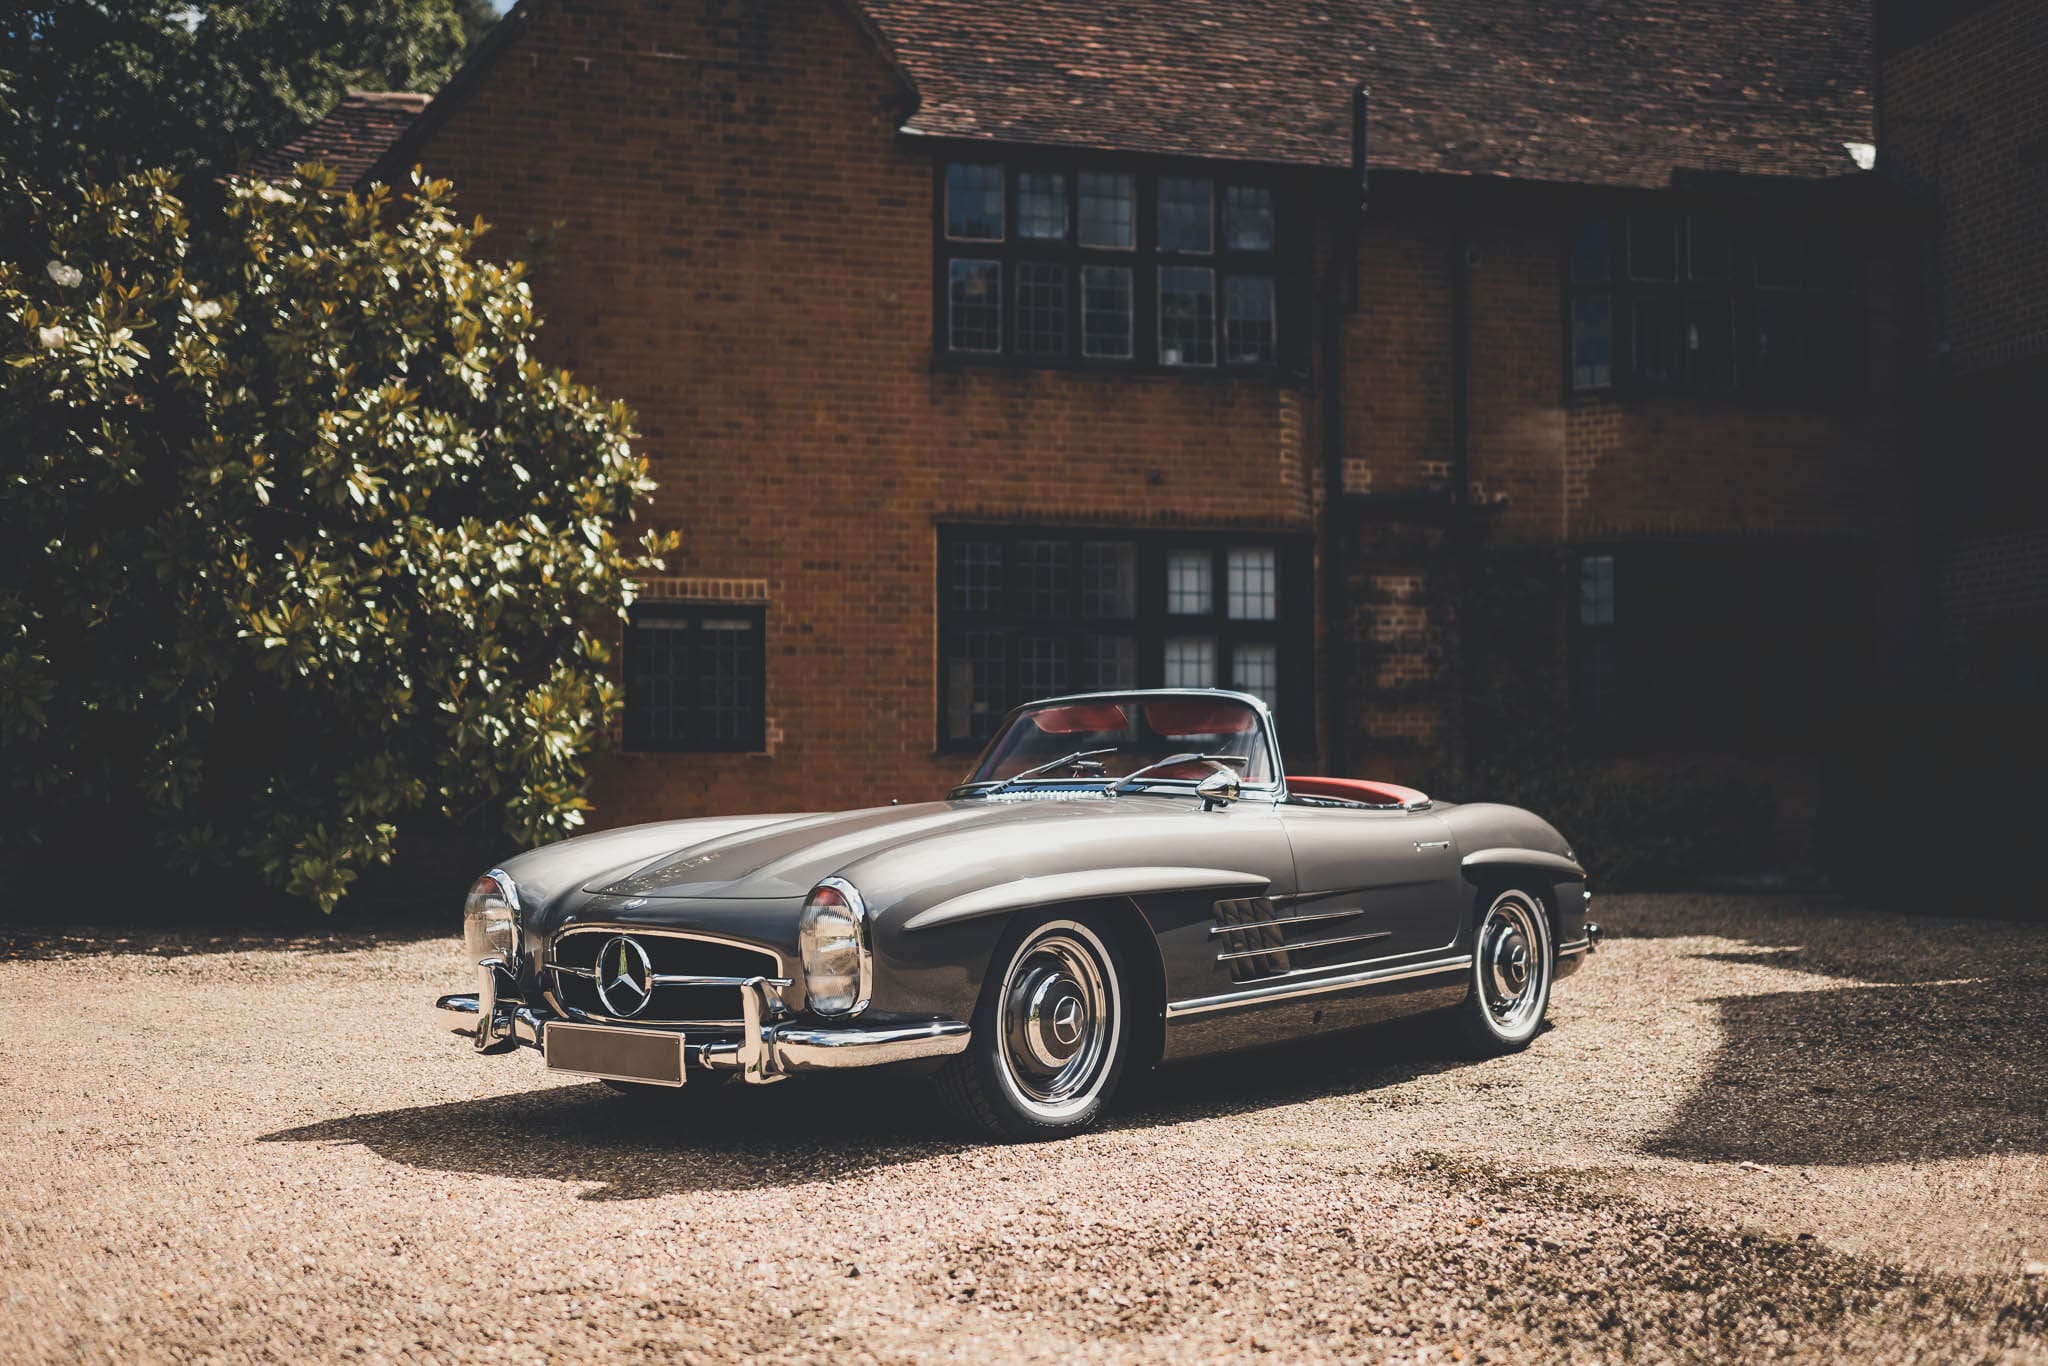 Mercedes-Benz 300 SL Roadster, For sale: <strong>Mercedes-Benz 300 SL Roadster uit &#8217;57</strong>